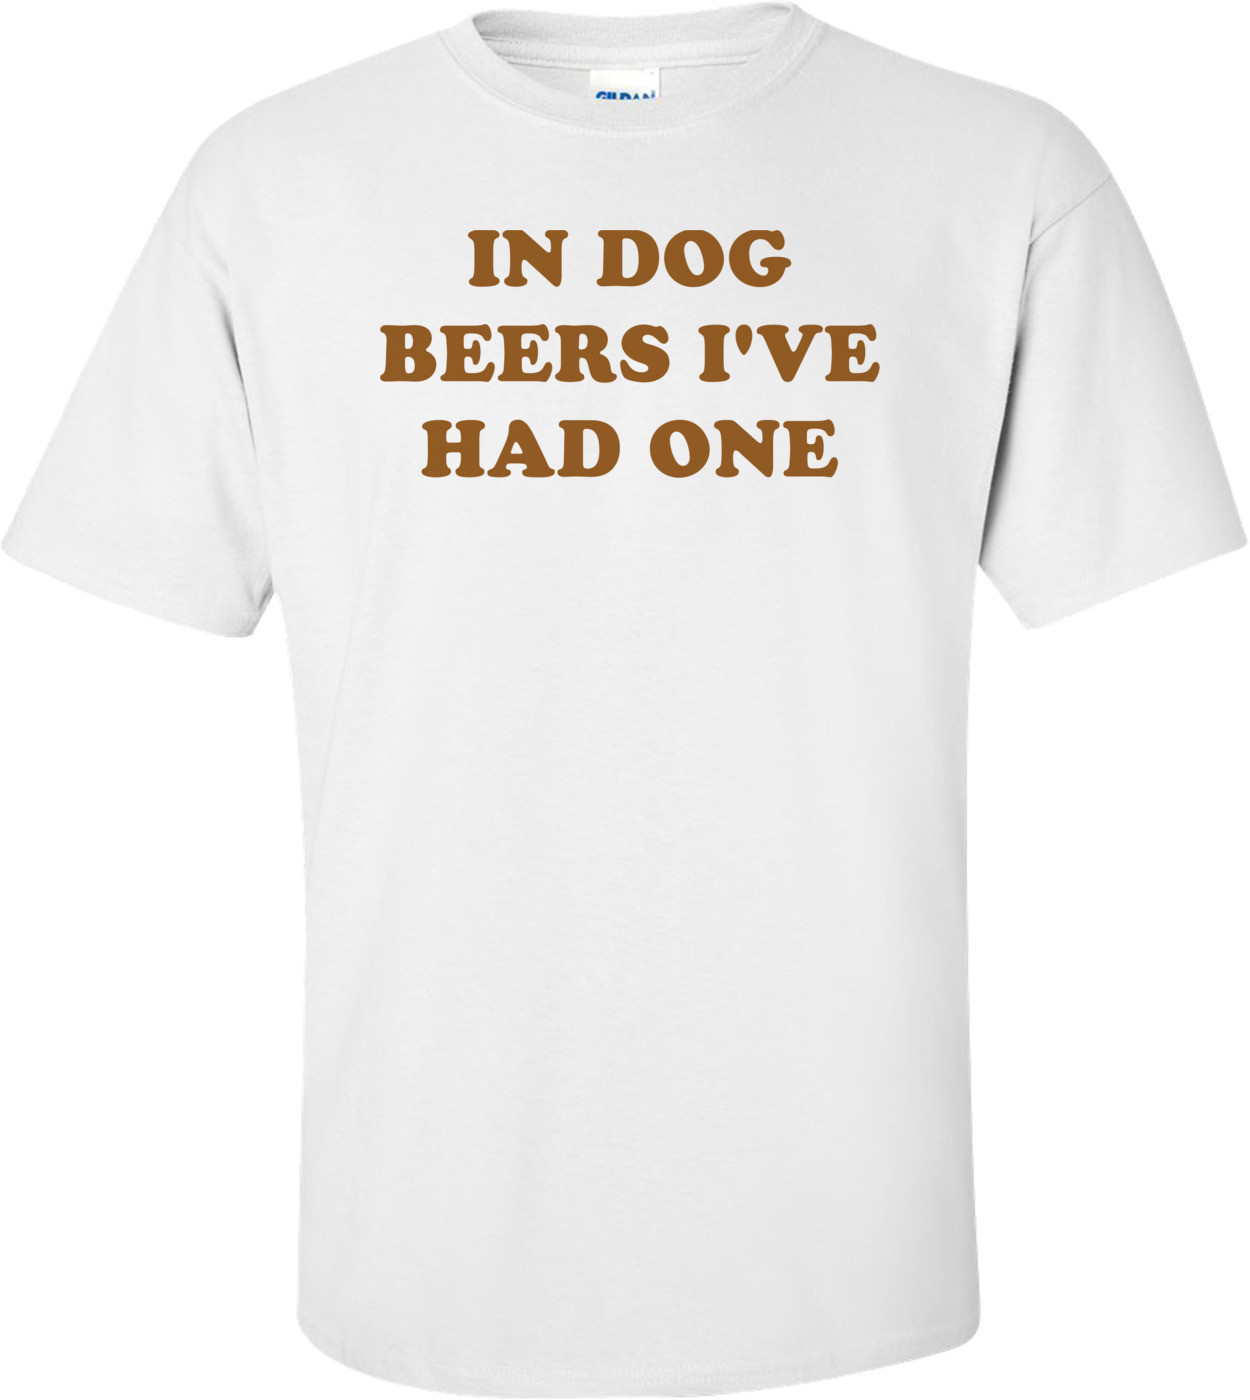 IN DOG BEERS I'VE HAD ONE